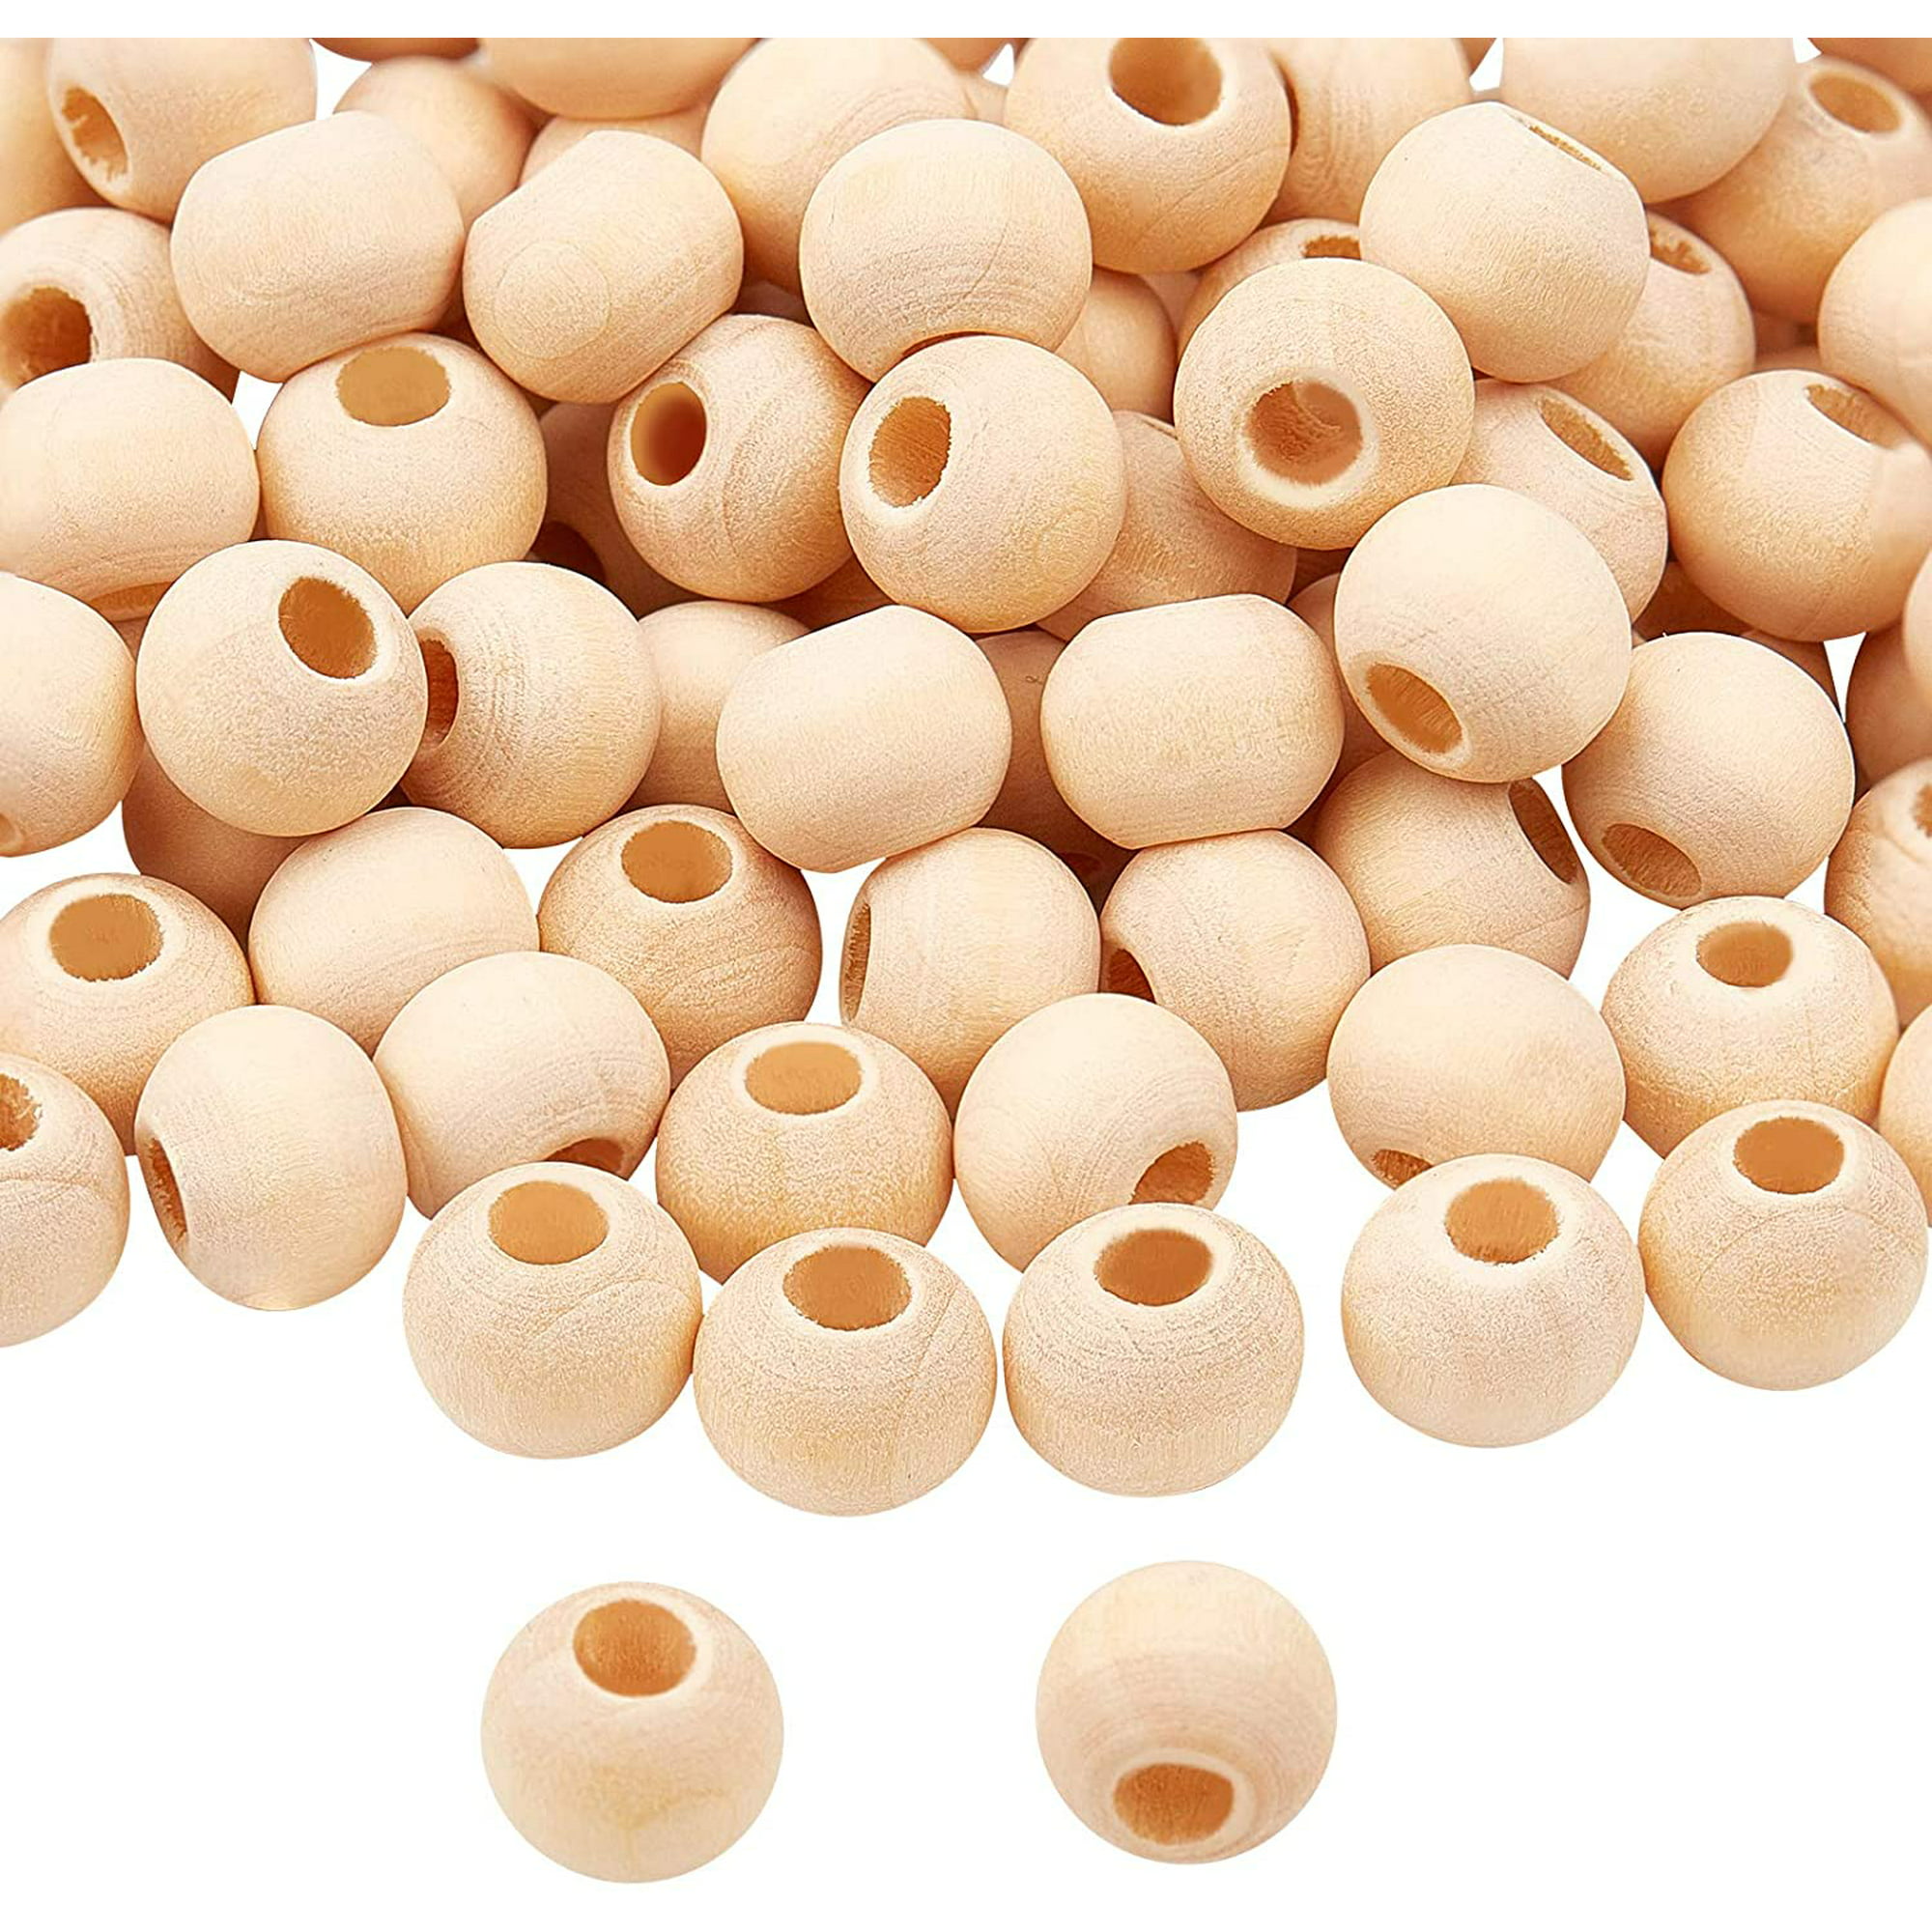 Foraineam 200 Pcs 1 Inch / 25mm Wood Beads Round Wooden Spacer Beads  Unfinished Natural Wood Loose Beads